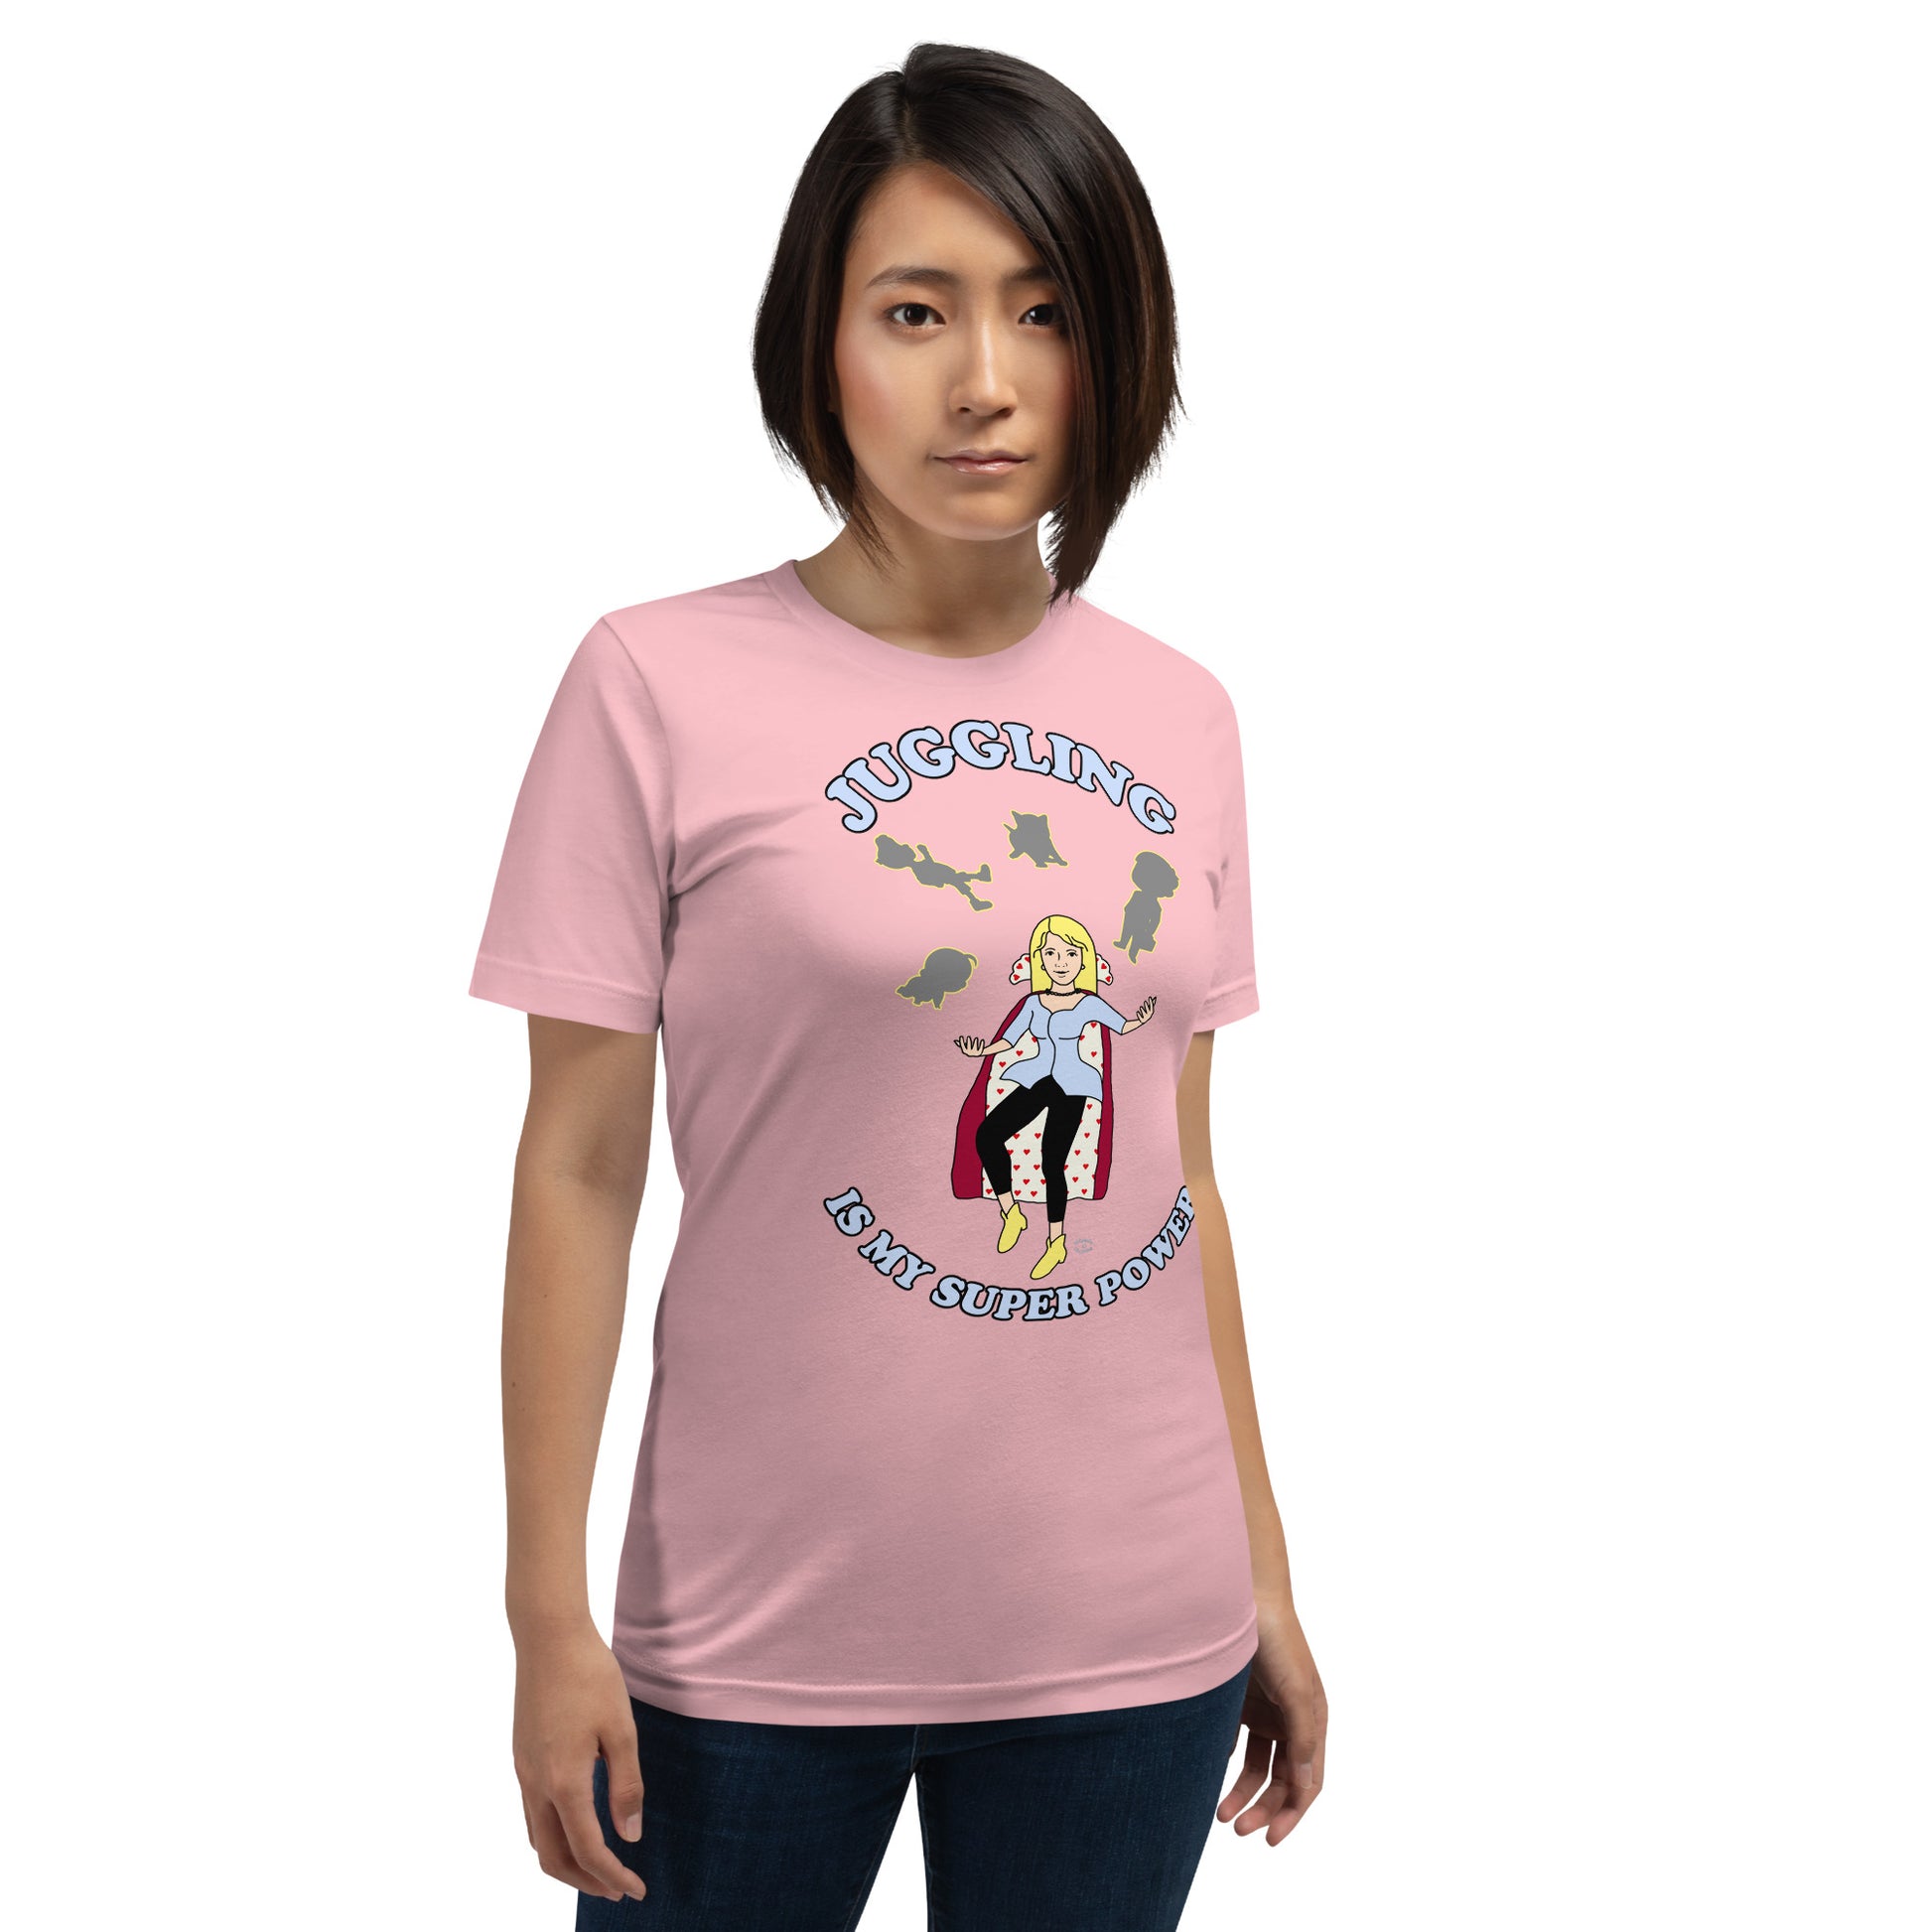 A women wearing a unisex short sleeve tshirt which has on the front a cartoon women in a cape juggling her family like a jester and the text Juggling Is My Super Power - front - pink